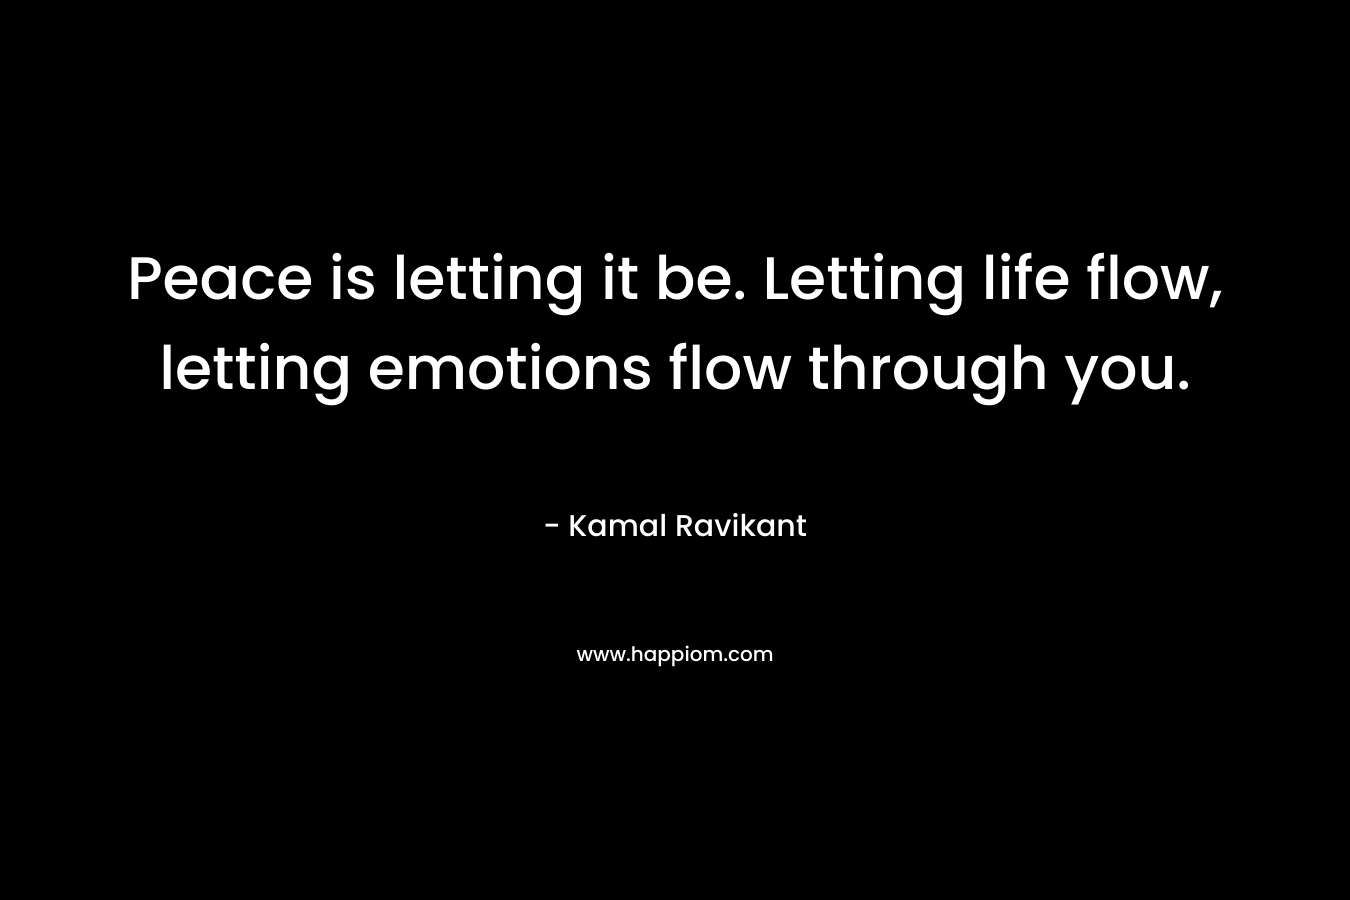 Peace is letting it be. Letting life flow, letting emotions flow through you.